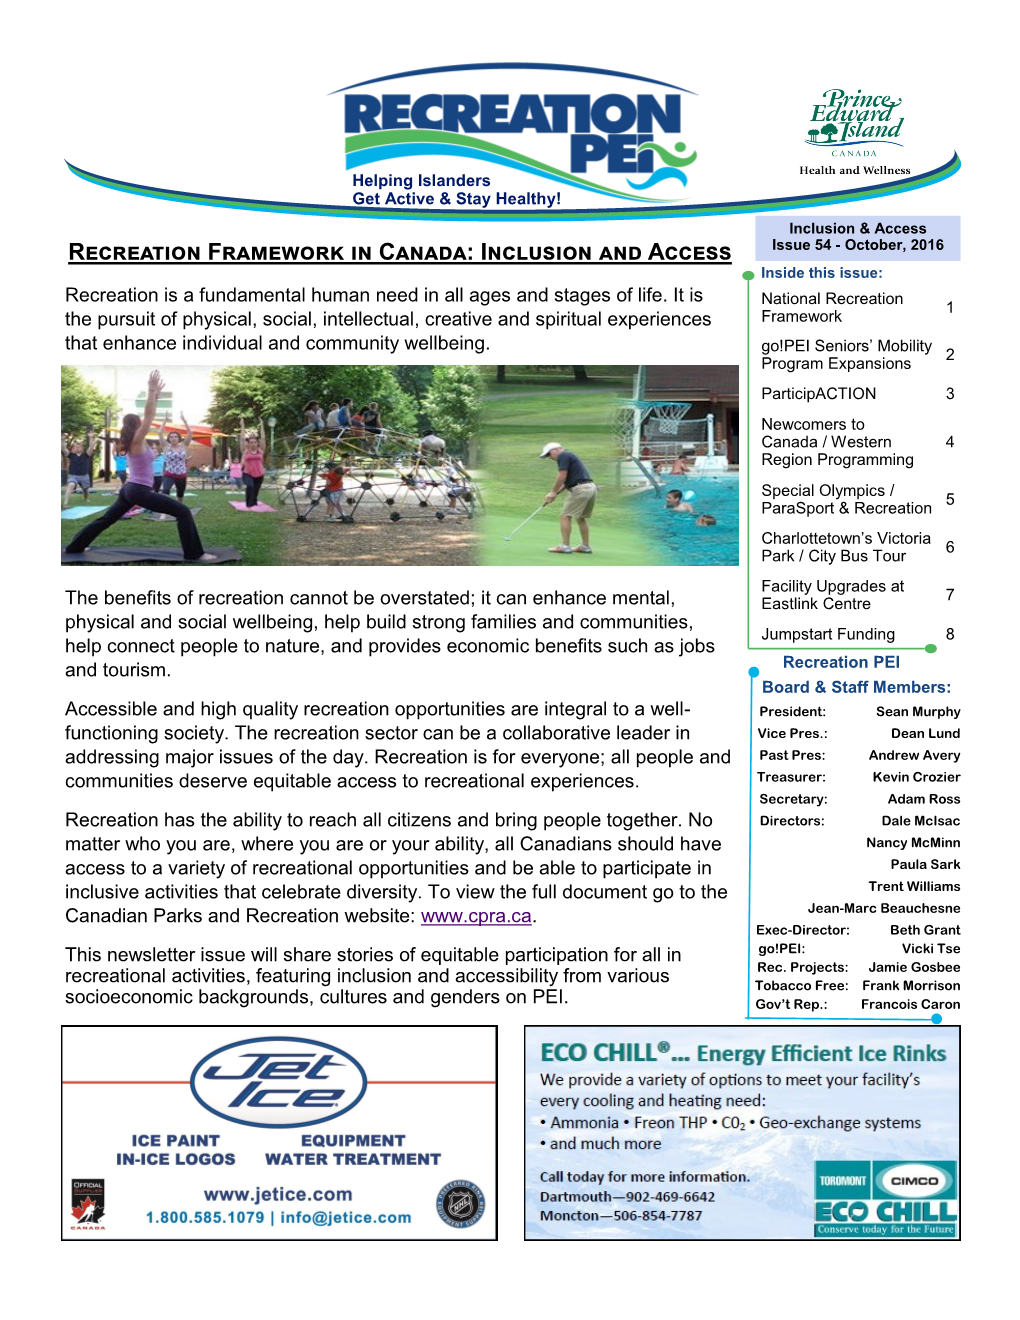 Recreation Framework in Canada: Inclusion and Access Issue 54 - October, 2016 Inside This Issue: Recreation Is a Fundamental Human Need in All Ages and Stages of Life